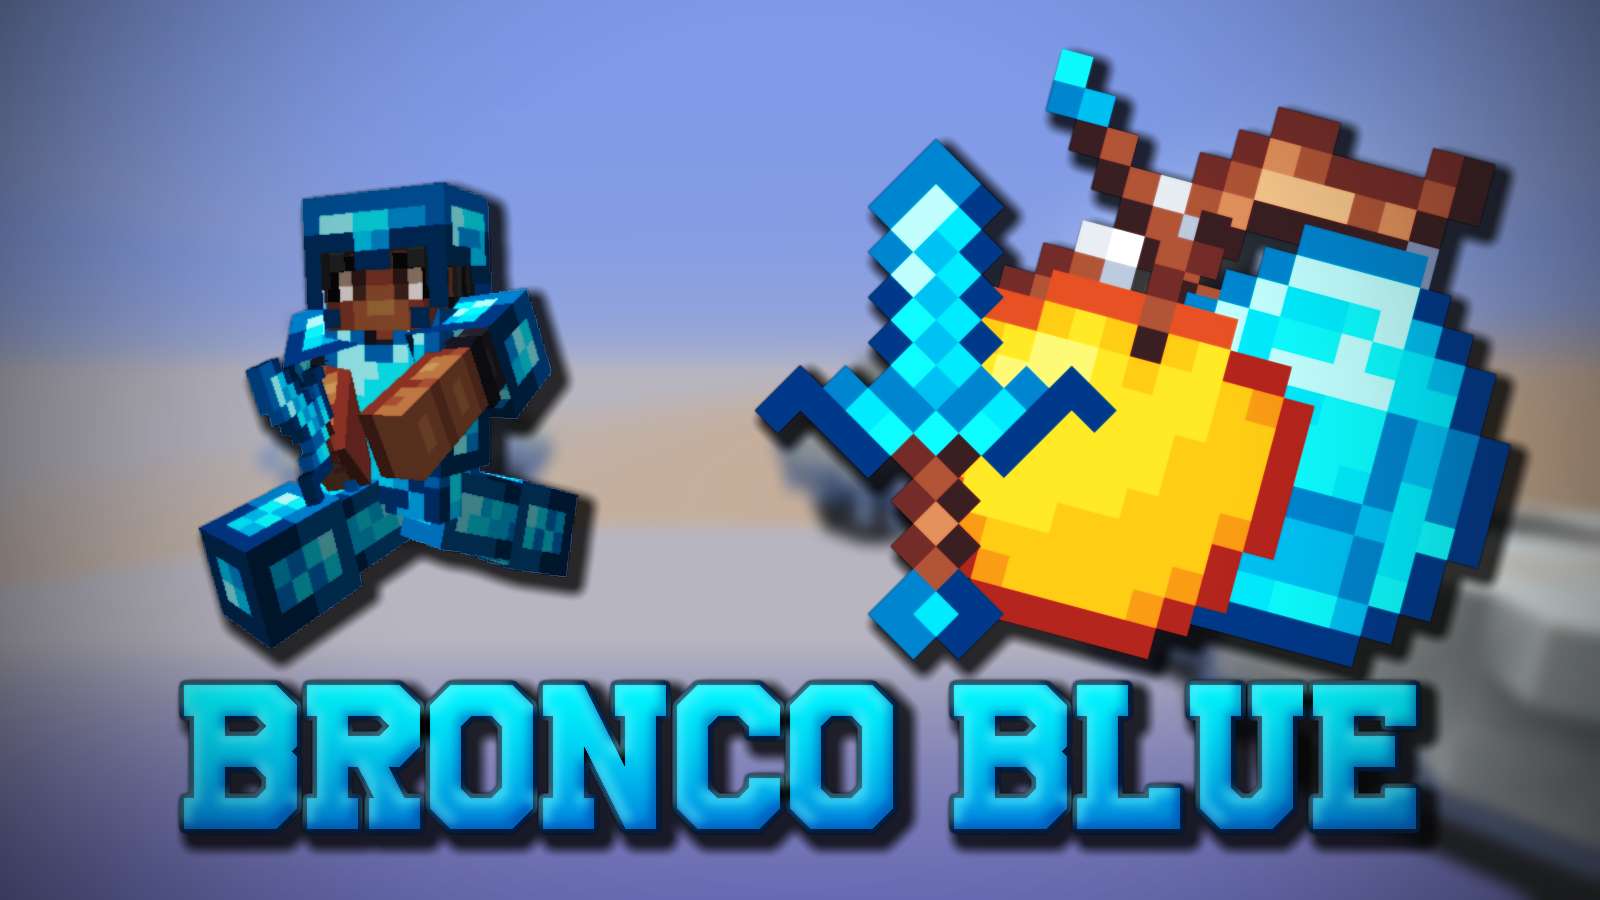 Bronco Blue  16x by Lolopok on PvPRP